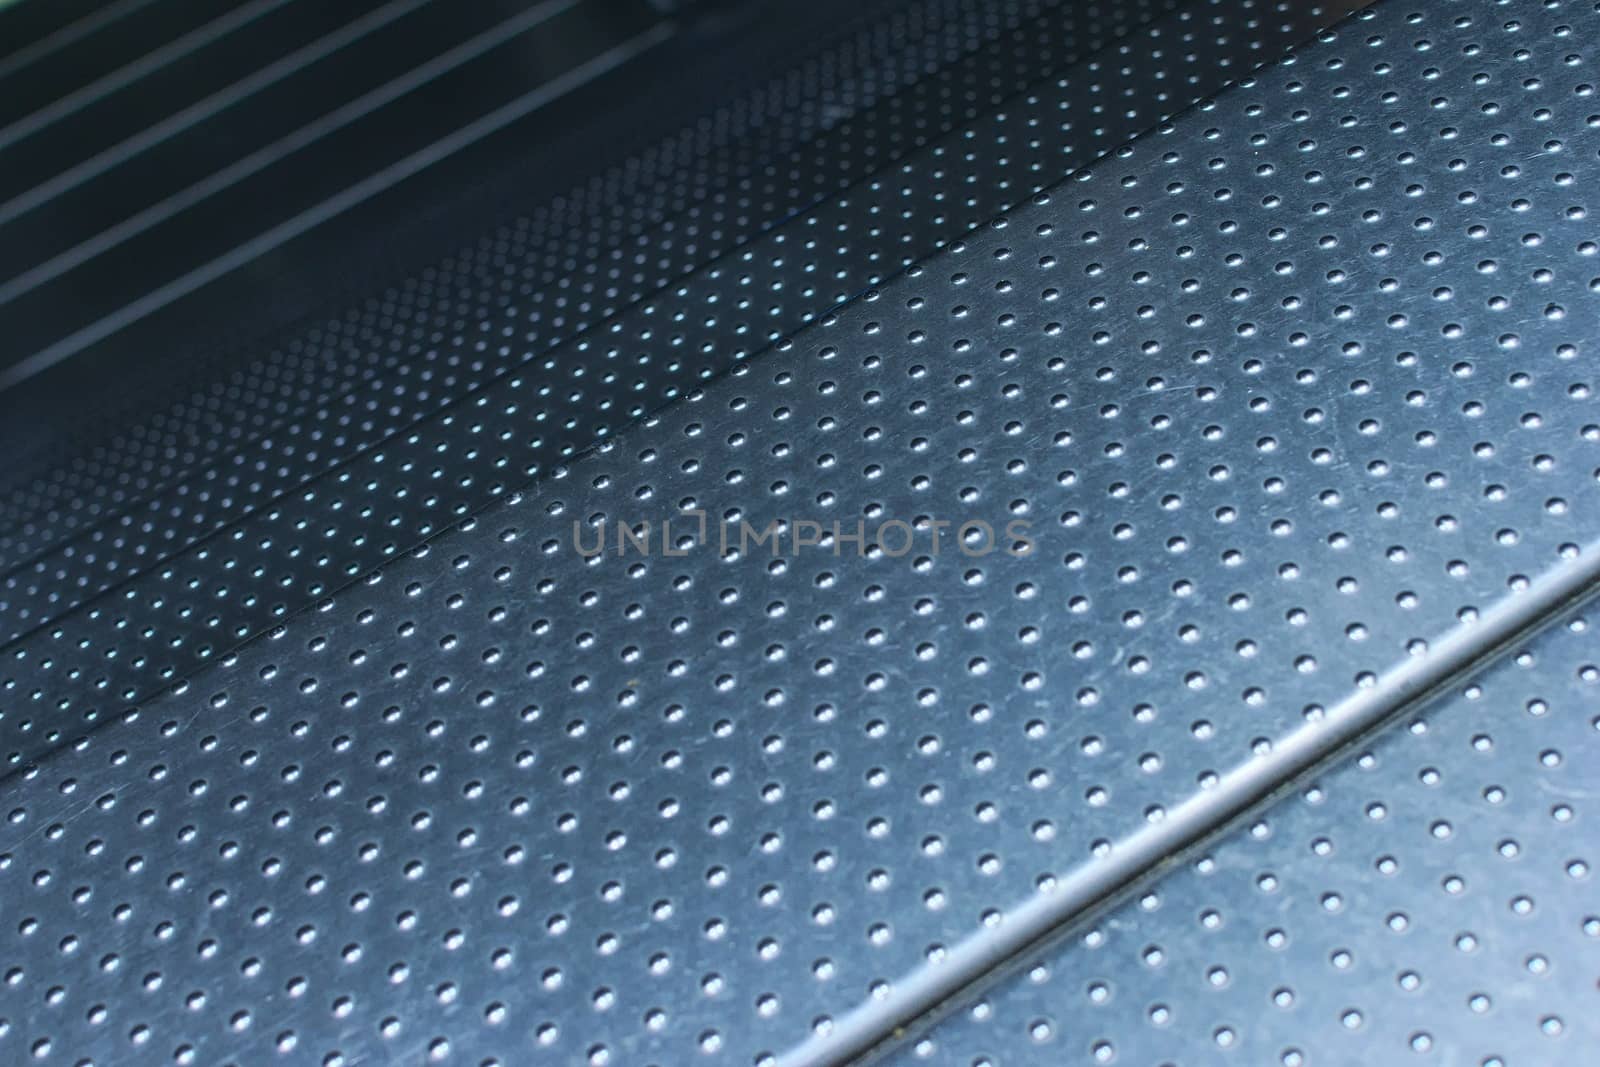 Studded steel plate flooring. Industrial background texture, high resistance material.